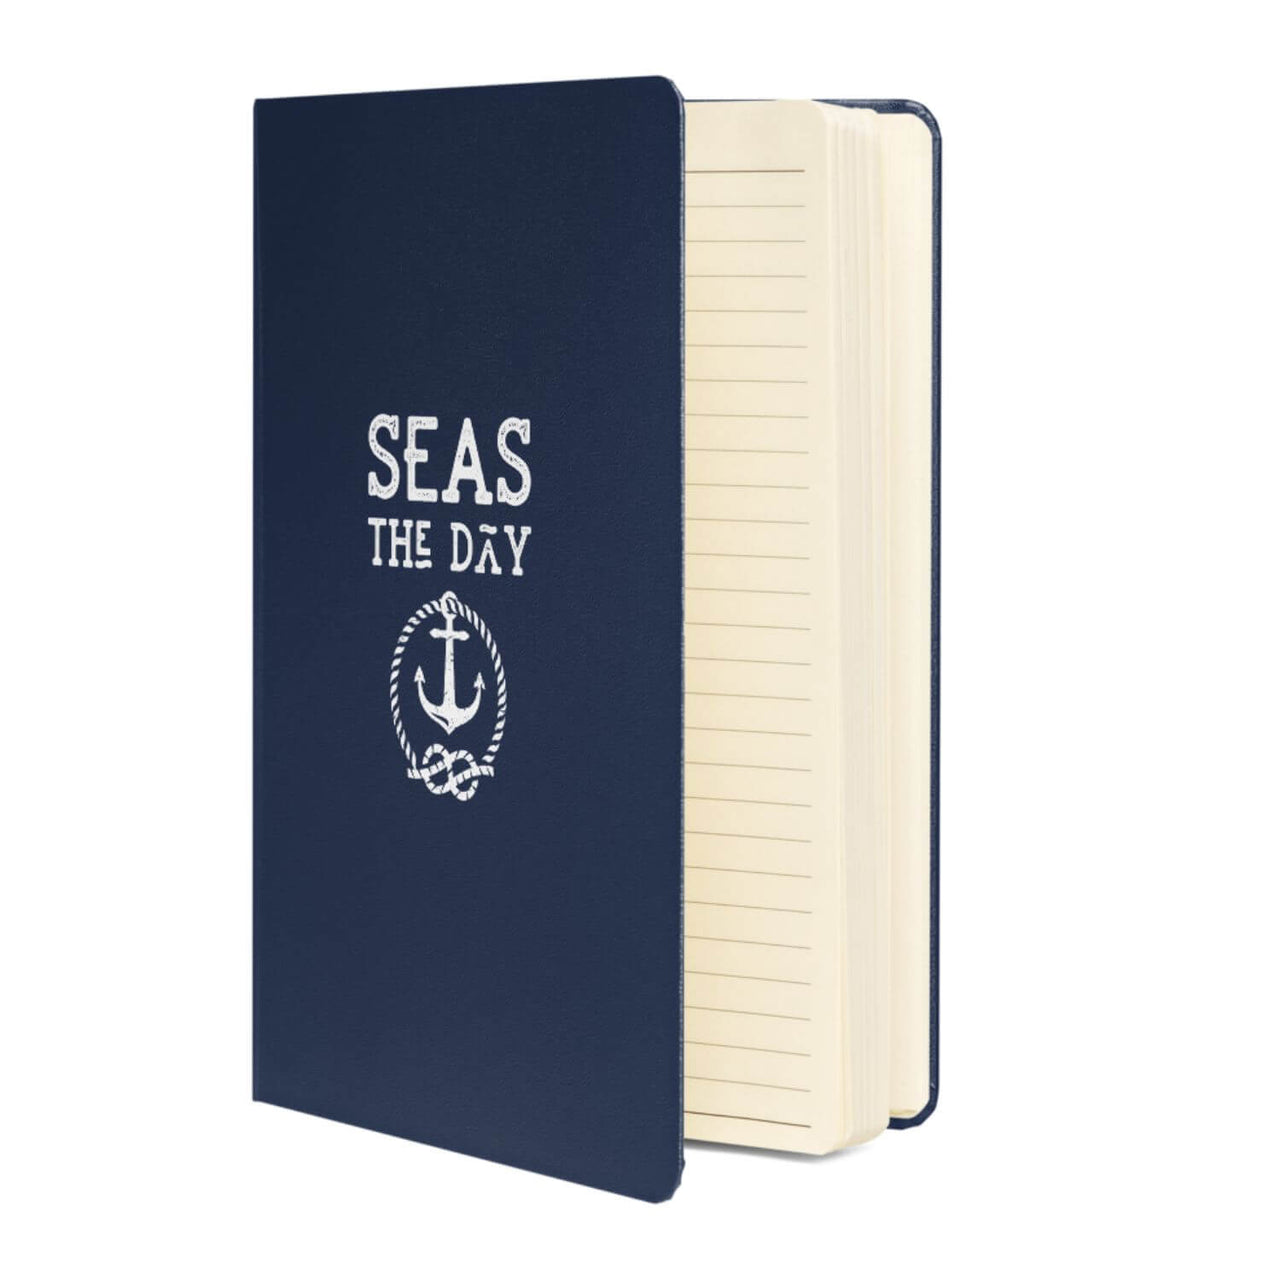 Nautical Journal, Seas The Day, Hardcover 5.5" x 8.5"  New England Trading Co   